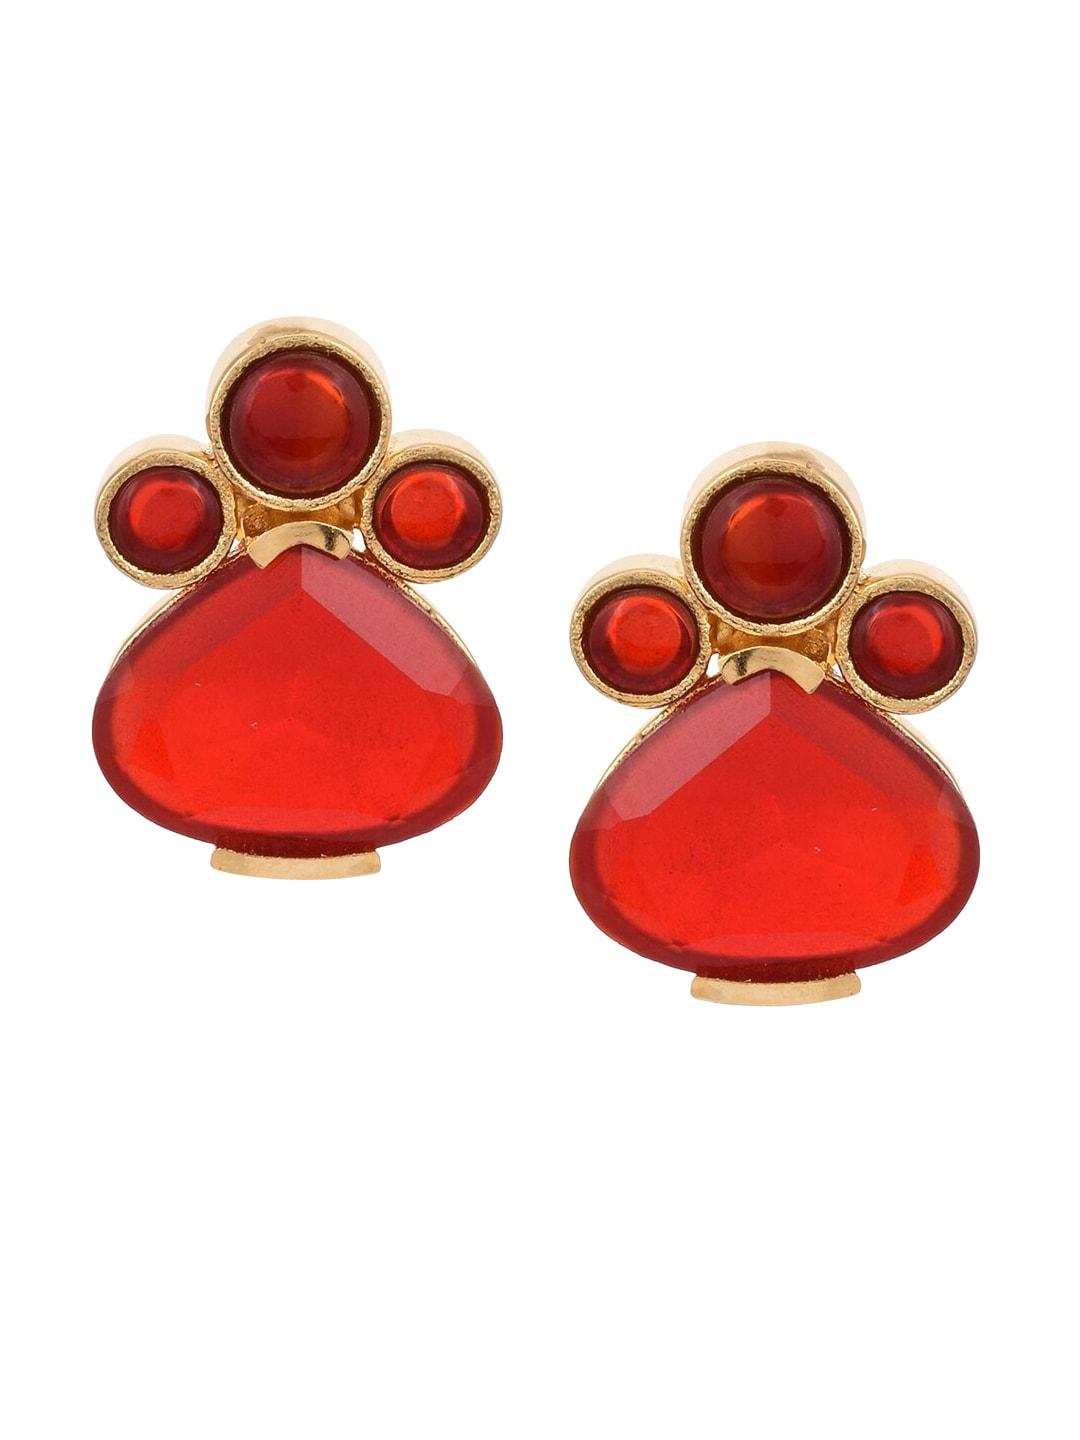 tistabene red & gold-toned contemporary studs earrings